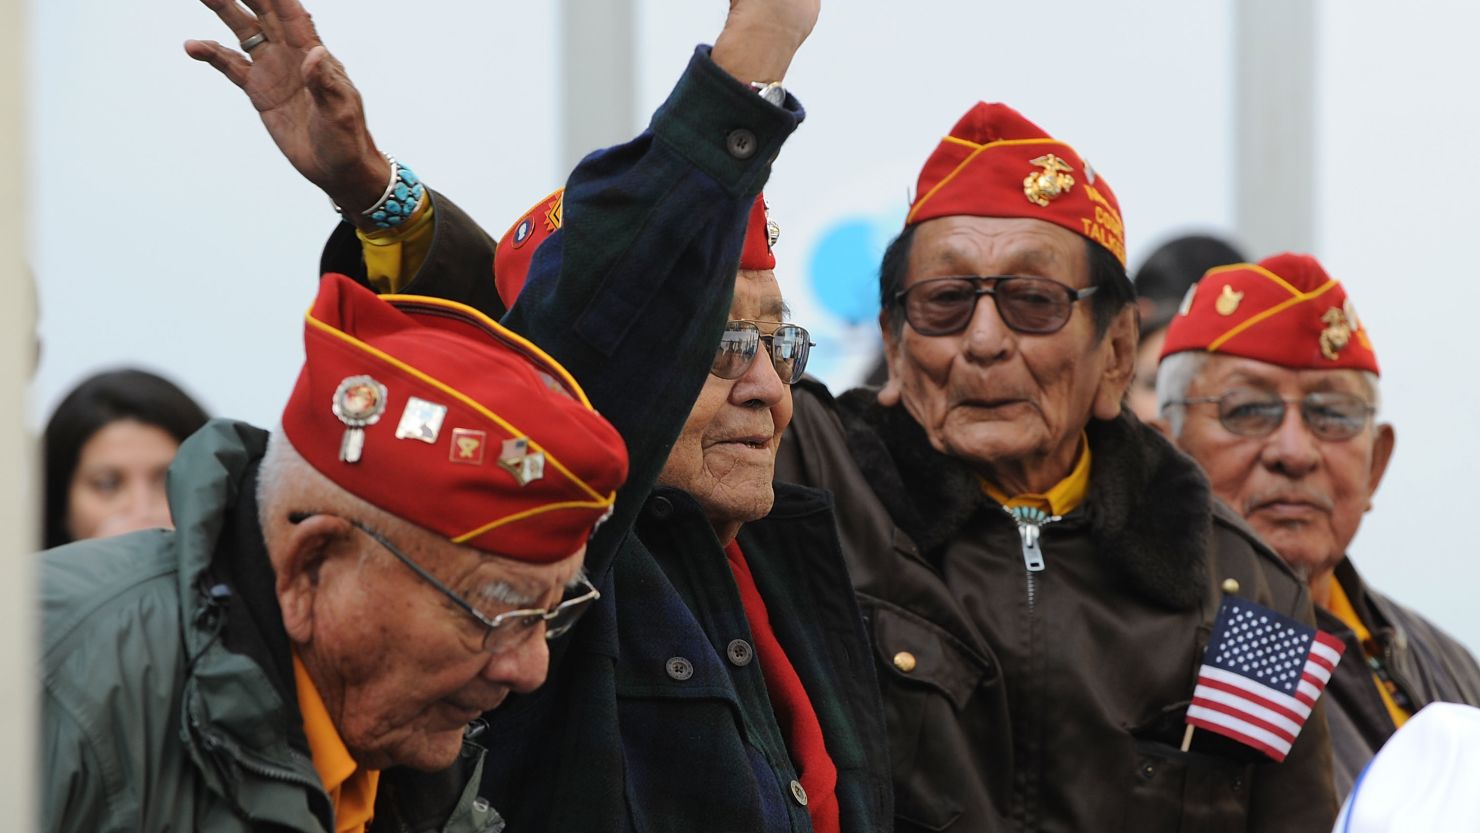 Navajo Code Talkers attend the 2011 Citi Military Appreciation Day event at Citi Pond in New York City on November 11, 2011.